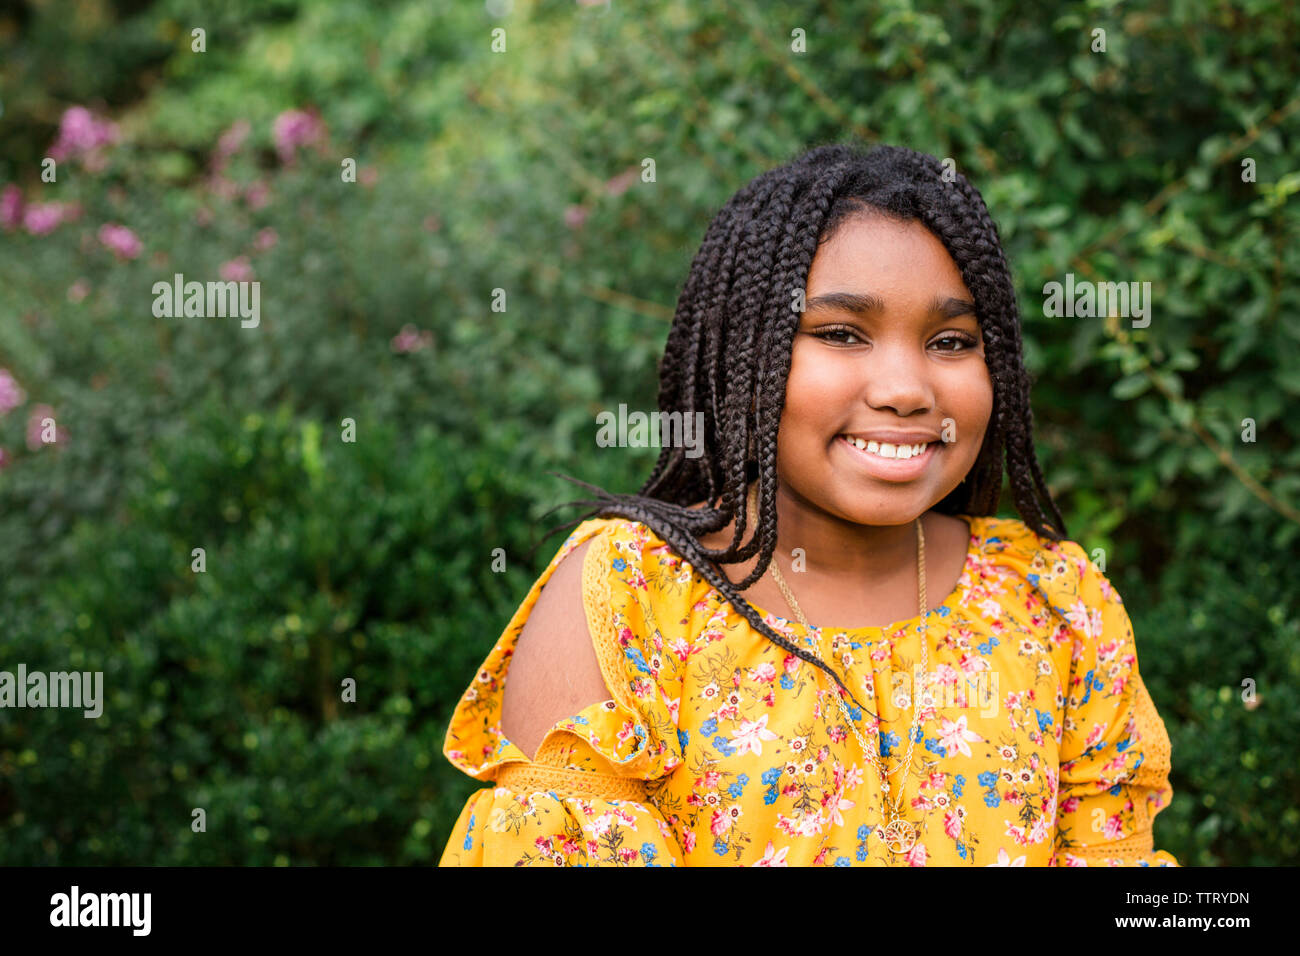 Portrait of smiling girl with braided hair sitting against plants in park Stock Photo